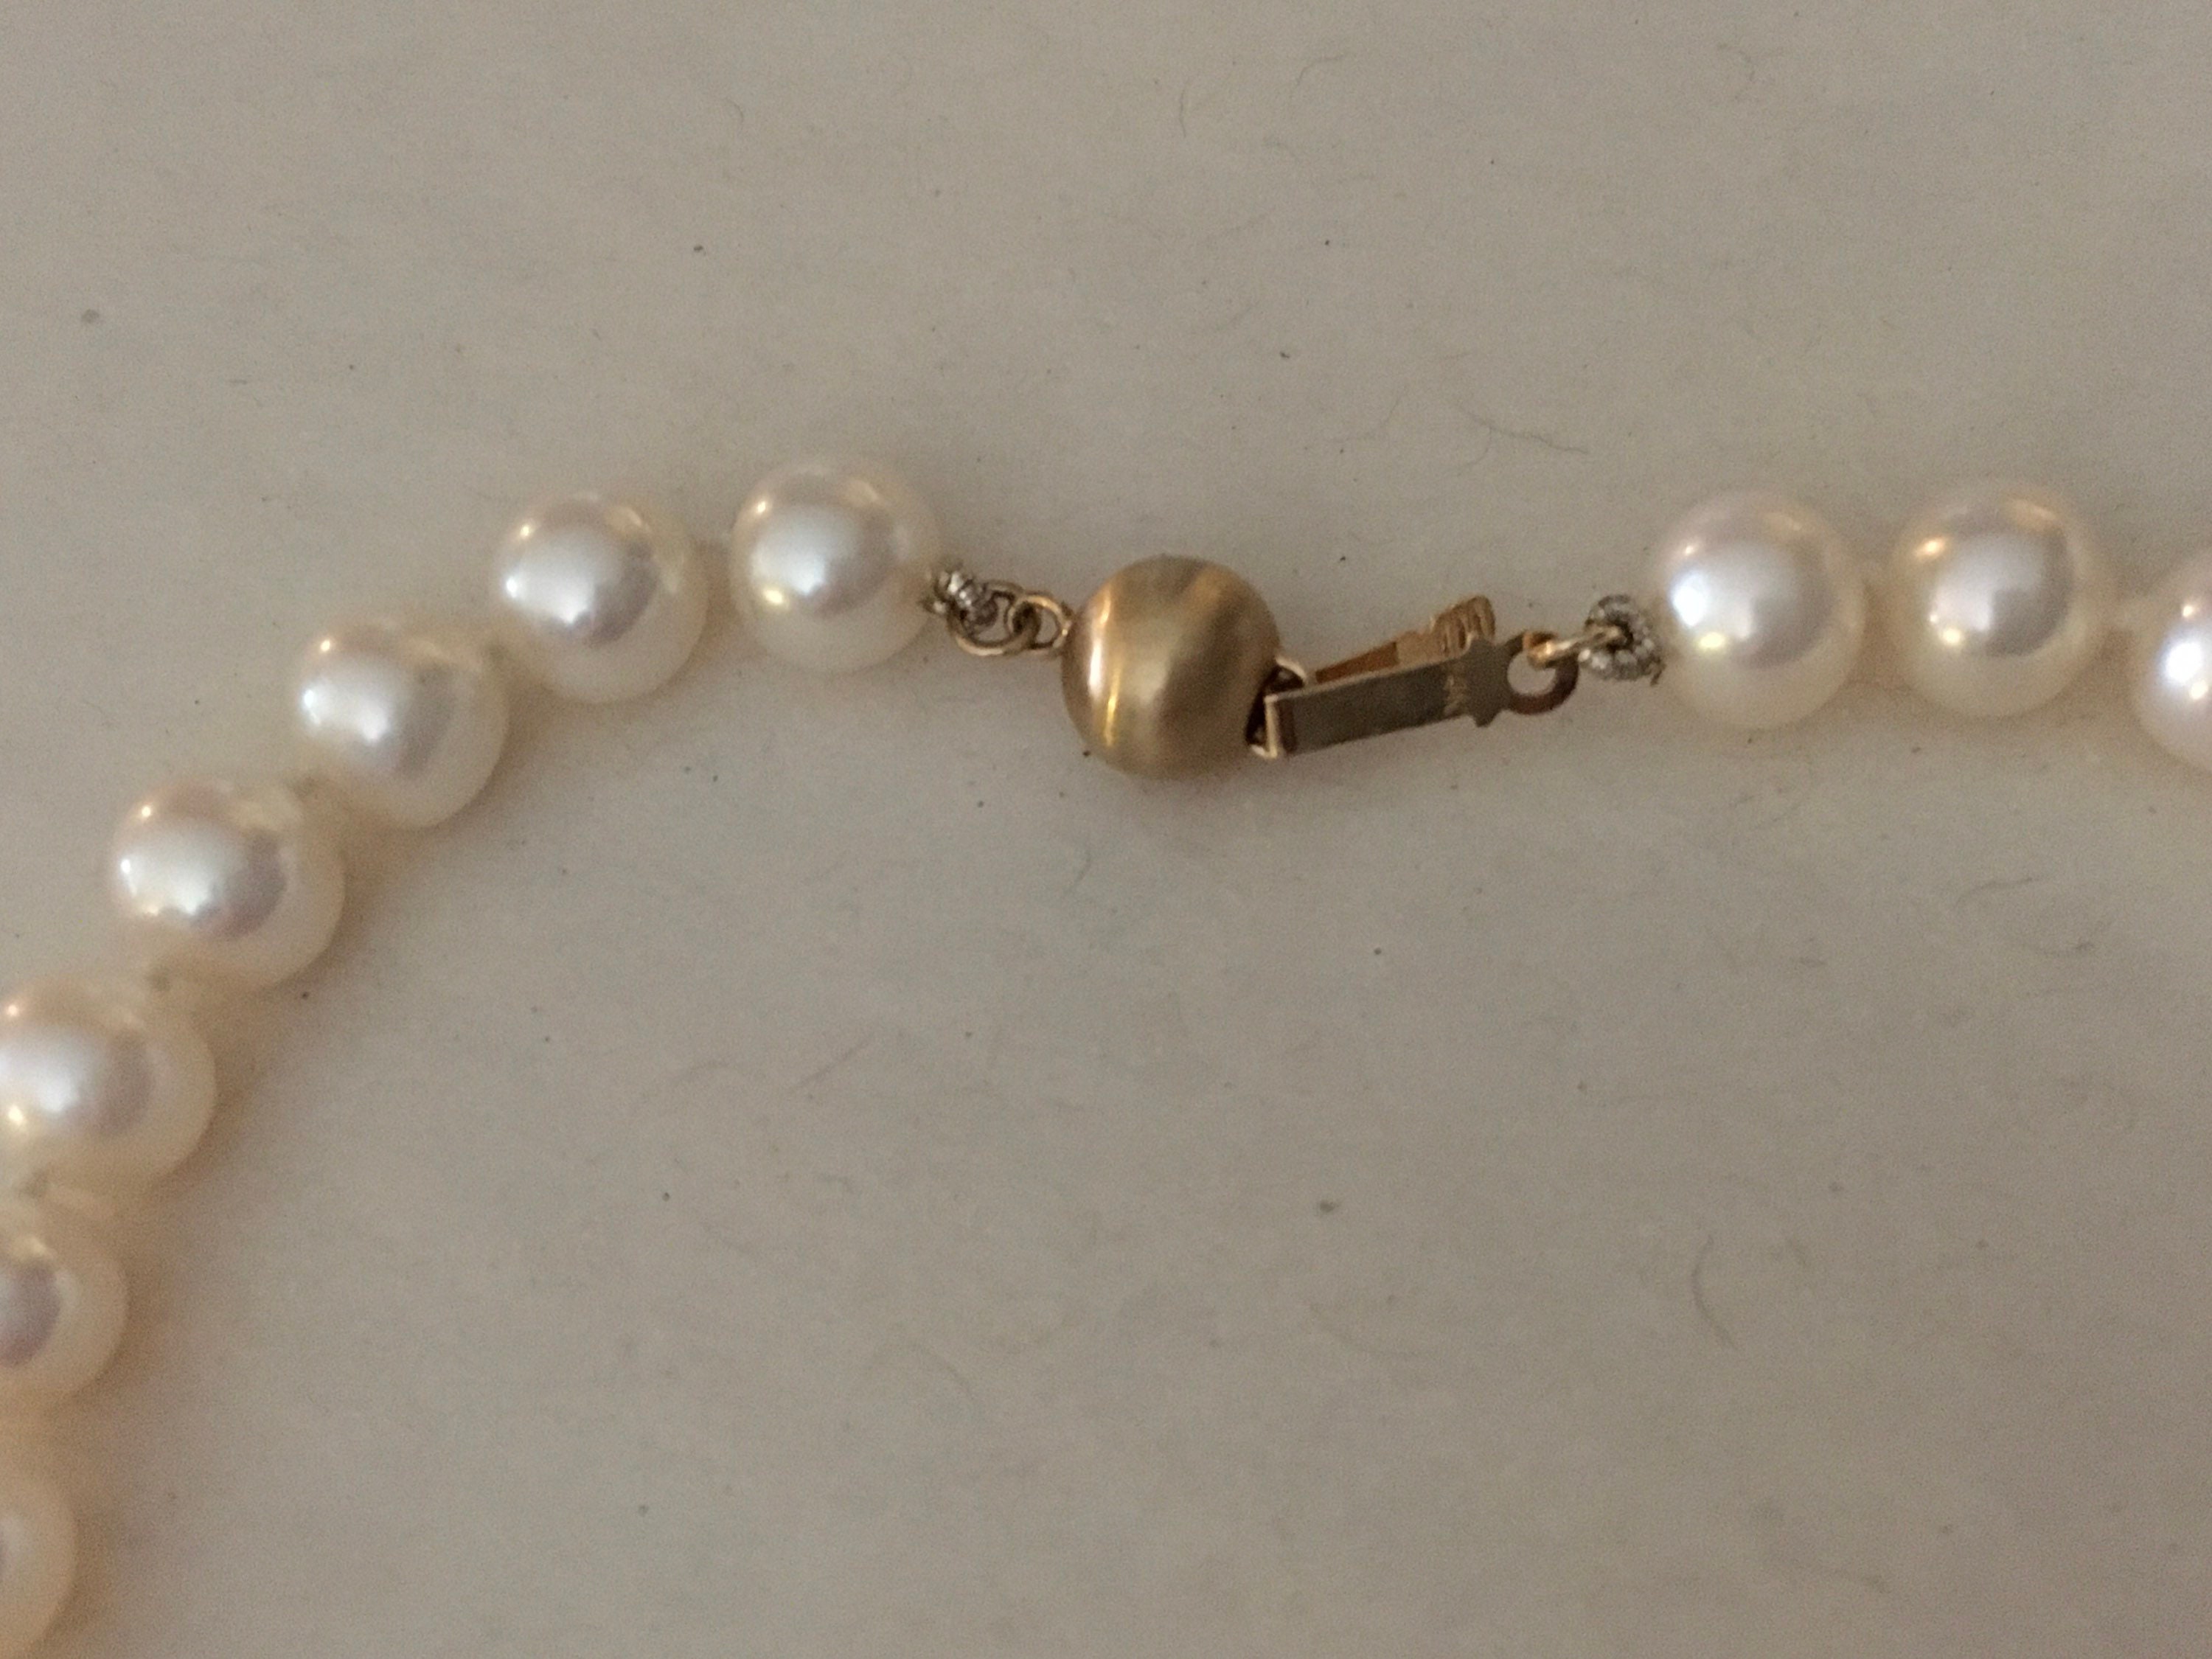 Cultured pearl necklace with 14 carat gold ball clasp | Etsy